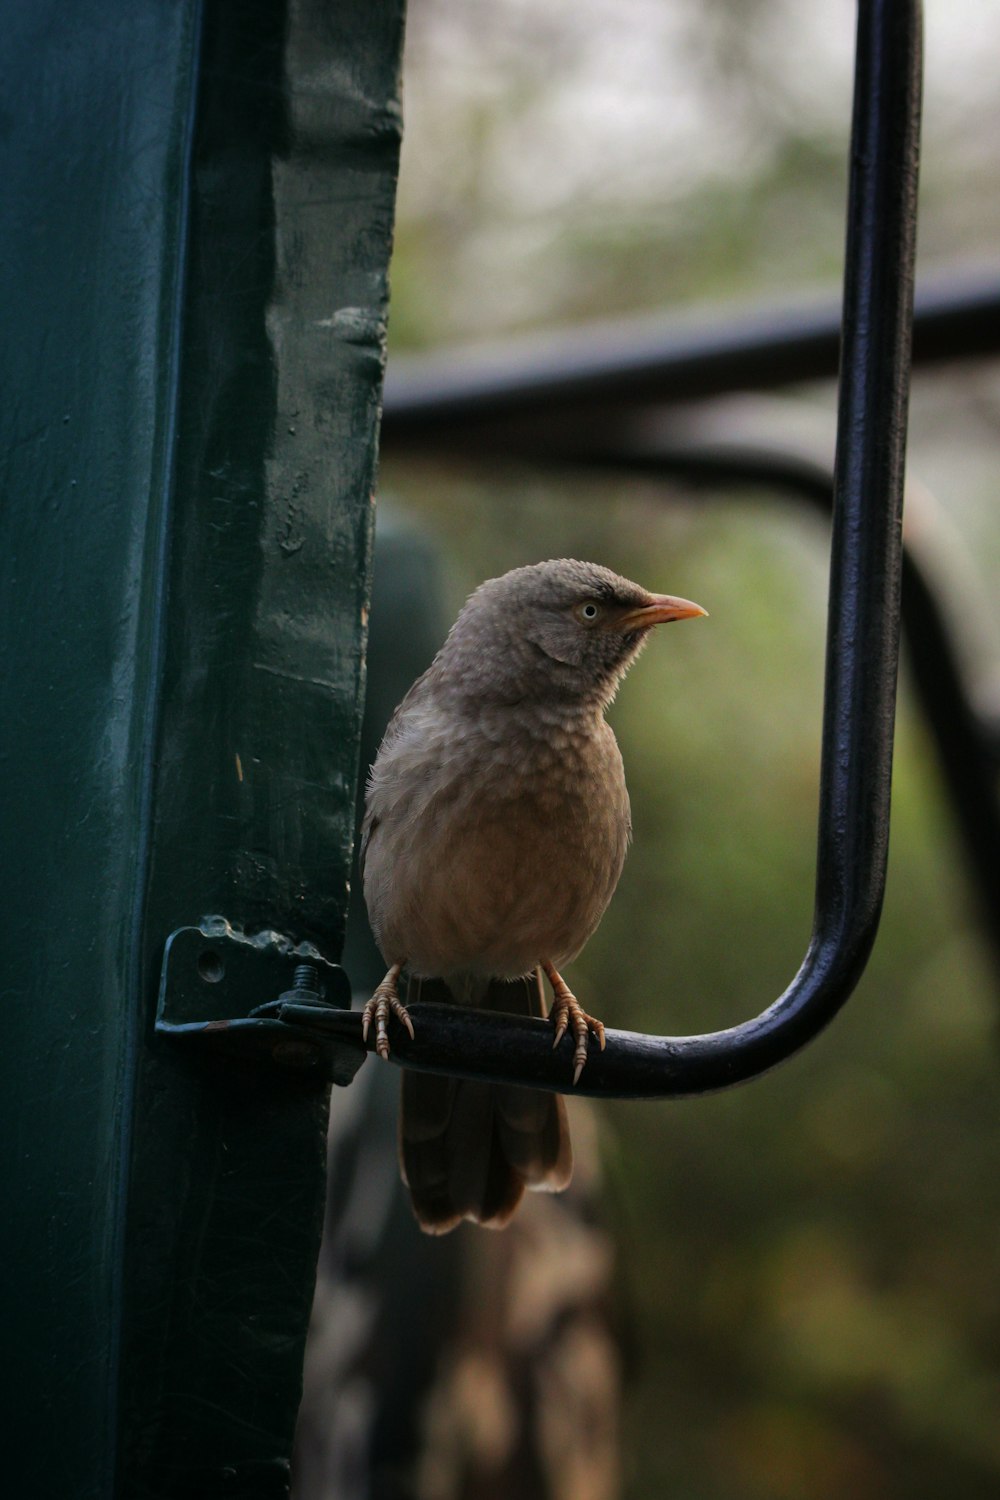 a small bird perched on the handle of a vehicle